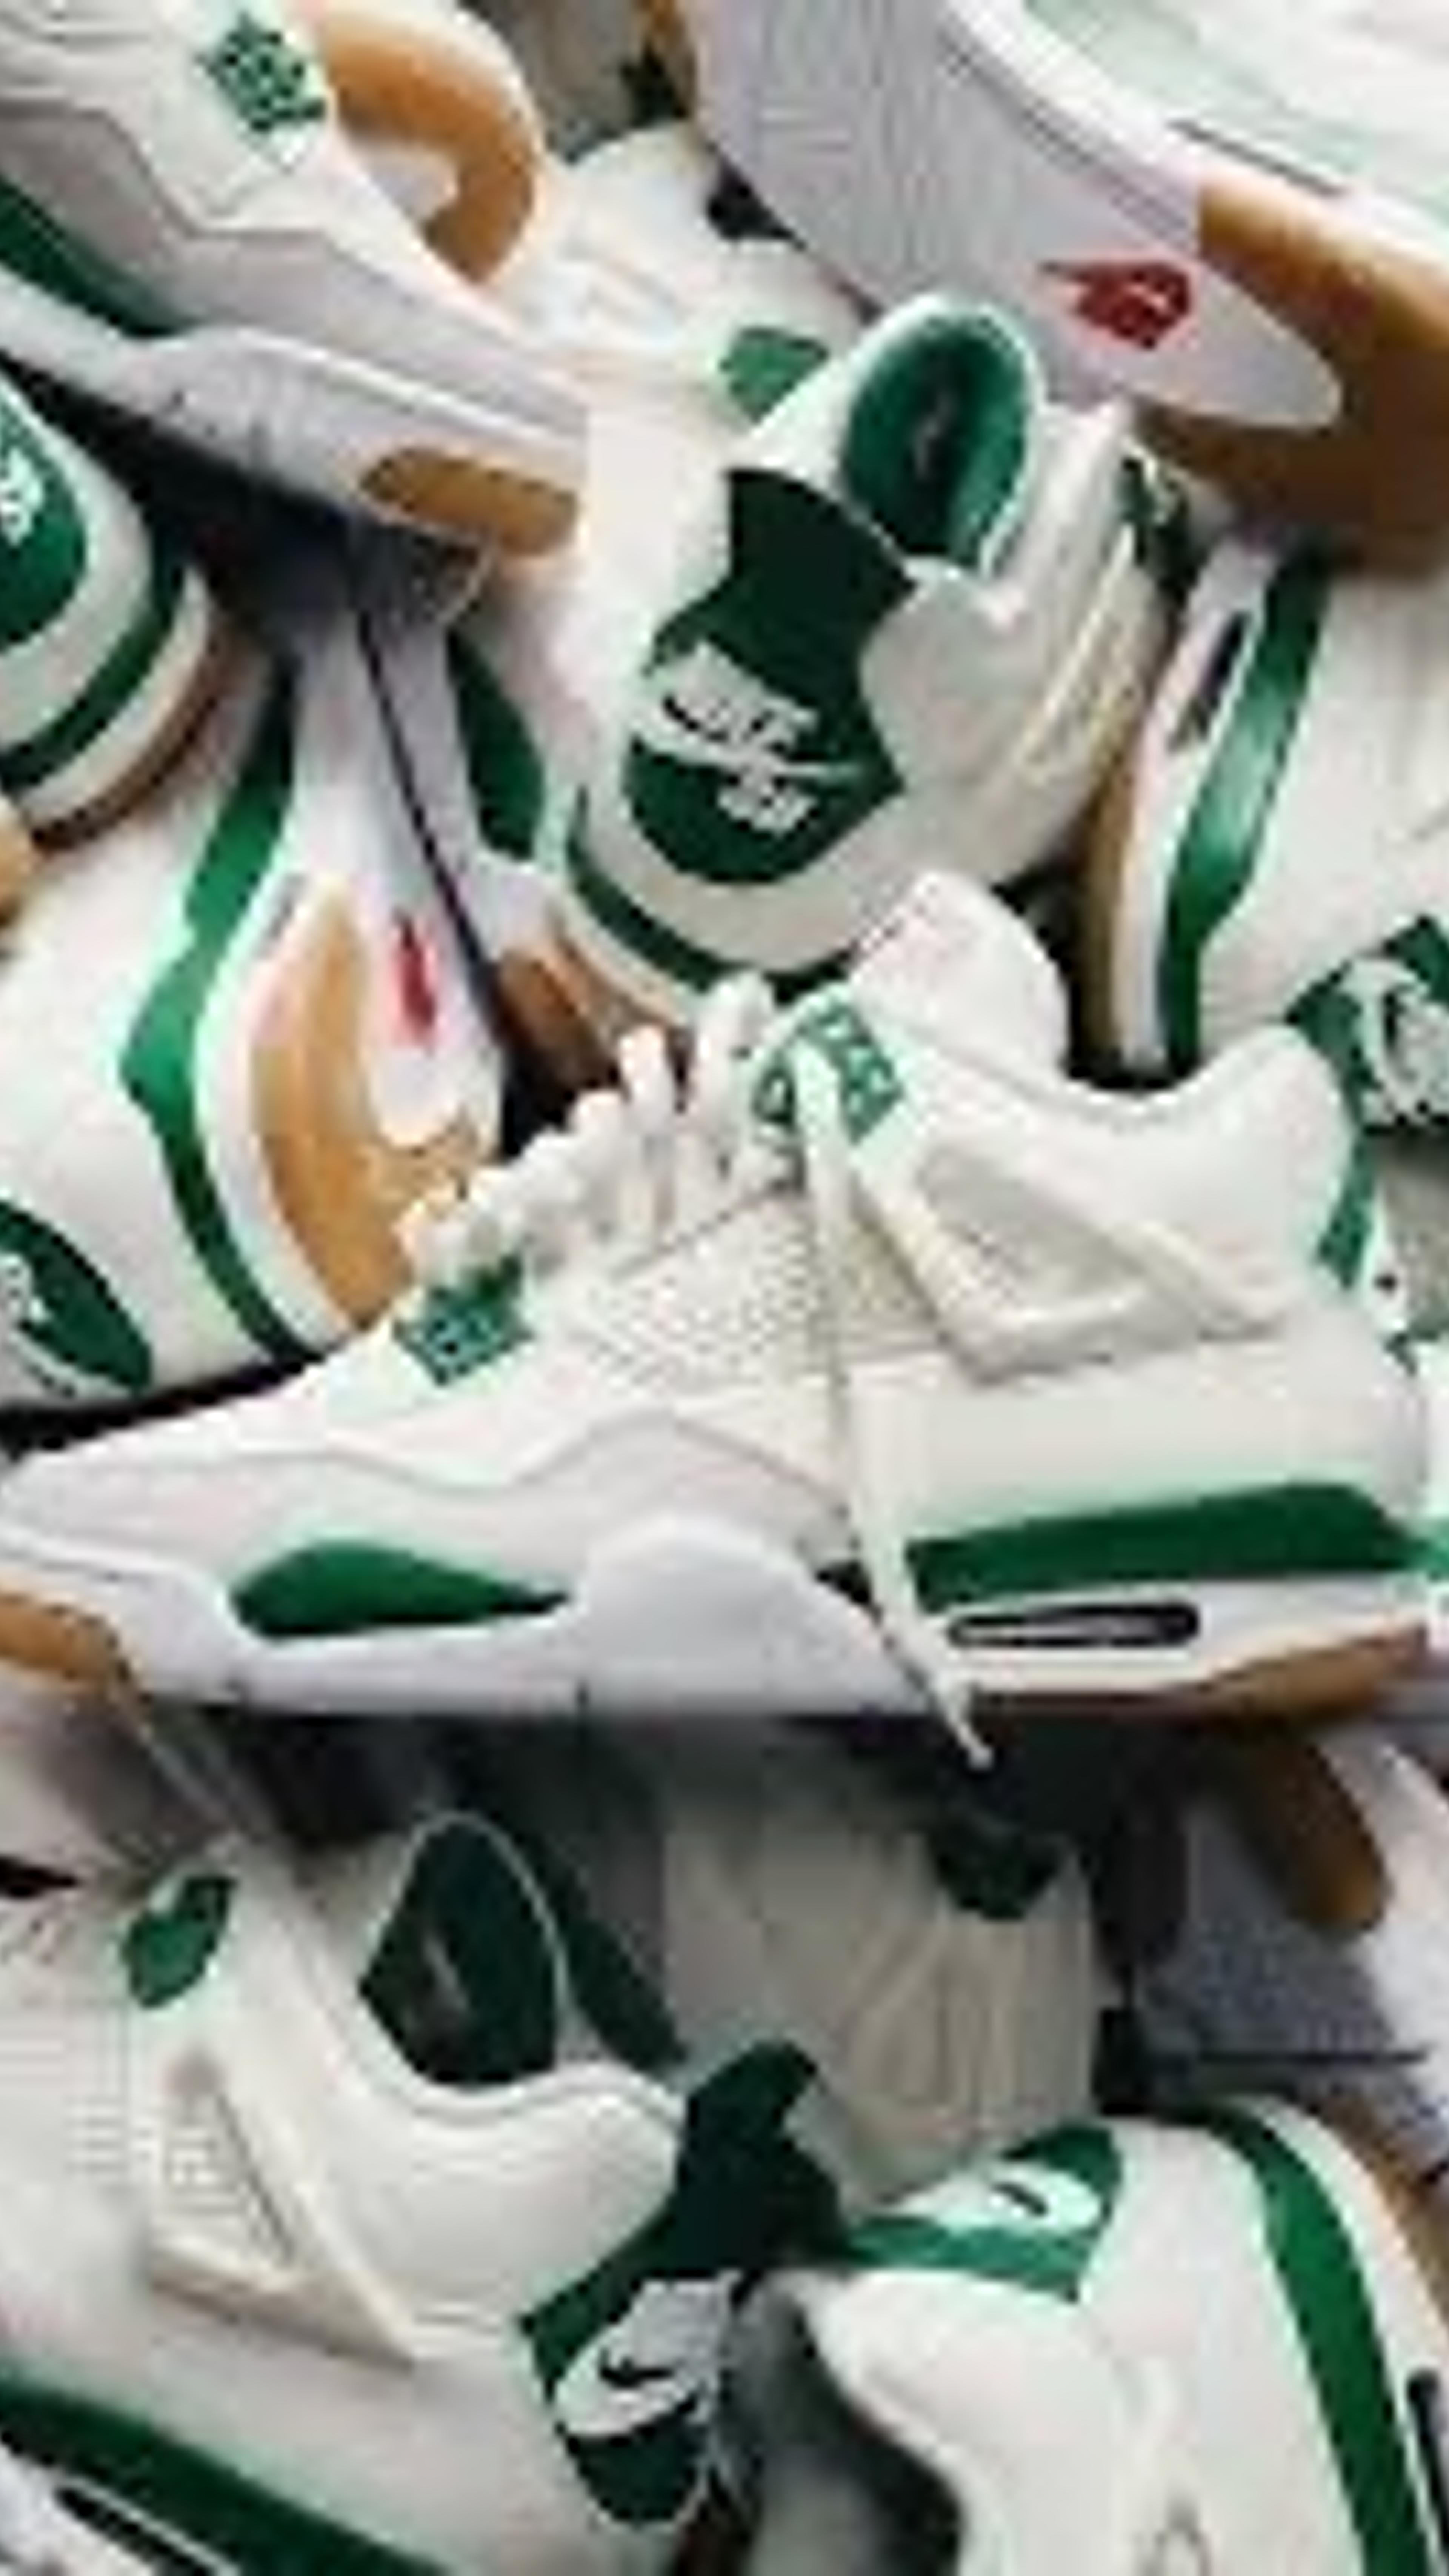 Preview image for the show titled "Mystery Wheel - ANY SIZE DS JORDAN 4 SB PINE GREEN!! " at April 26, 2024